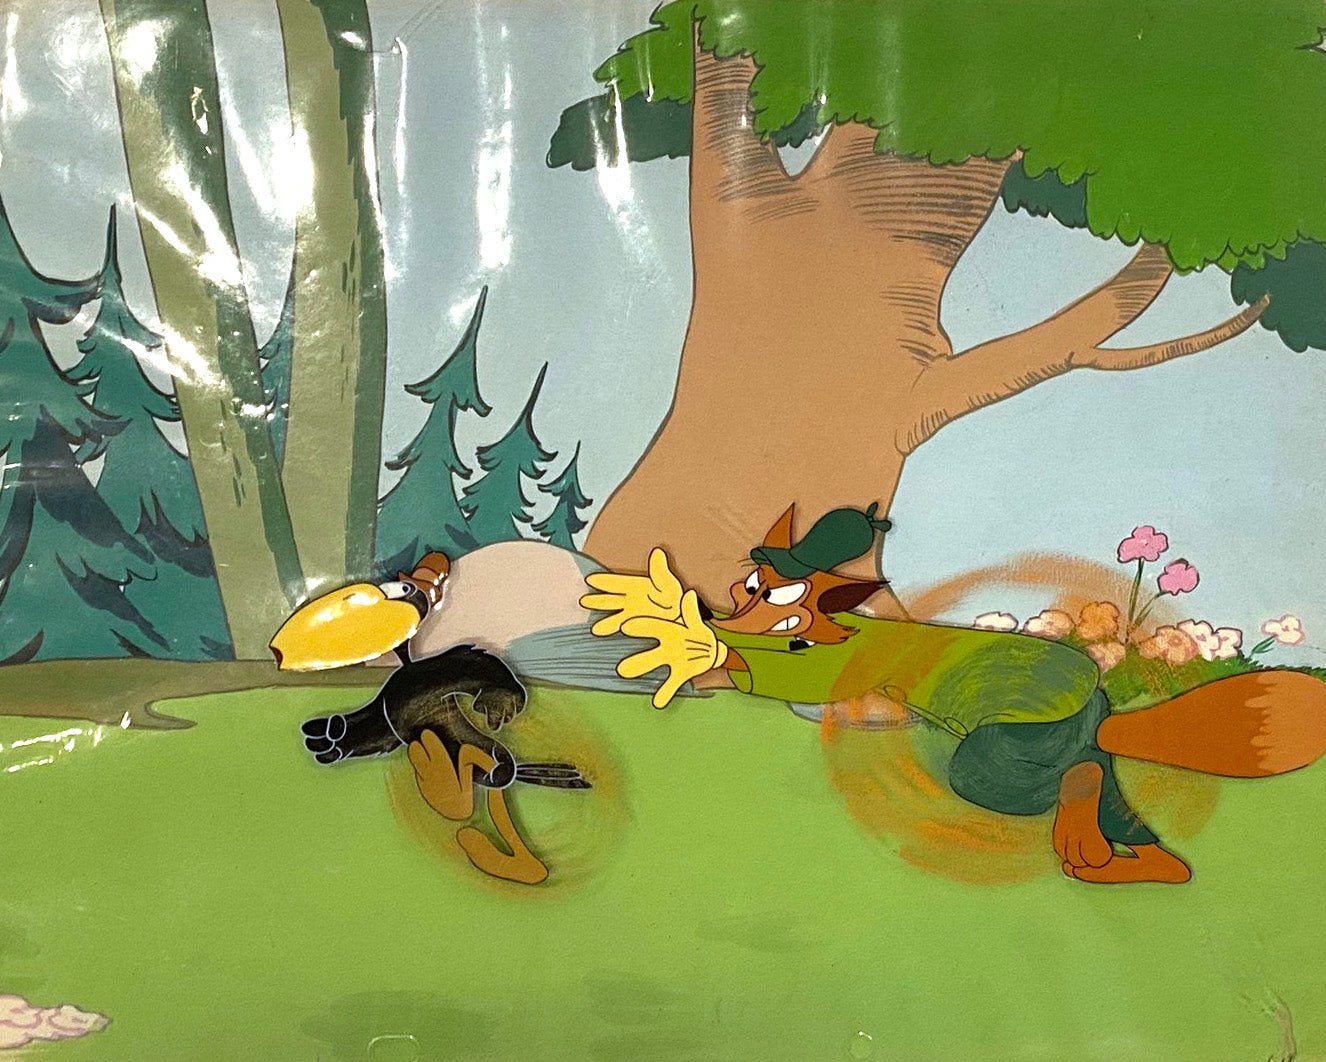 Original Columbia Pictures / Screen Gems Production Cel on Hand Painted Production Background from The Fox and the Crow